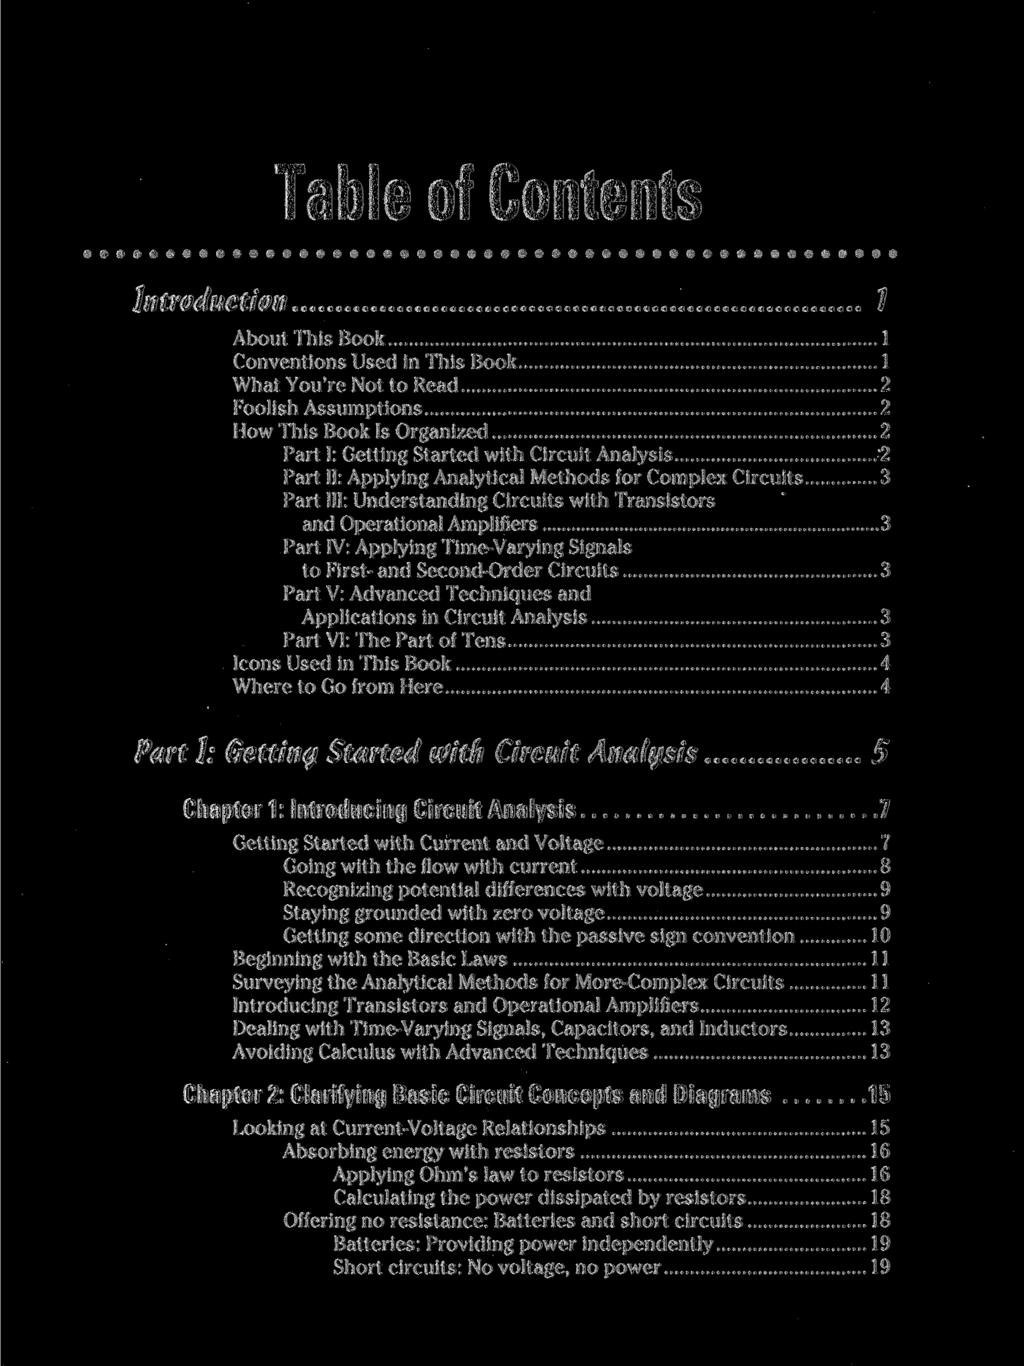 Table of Contents. ' : '" '! " ' ' '... ',.